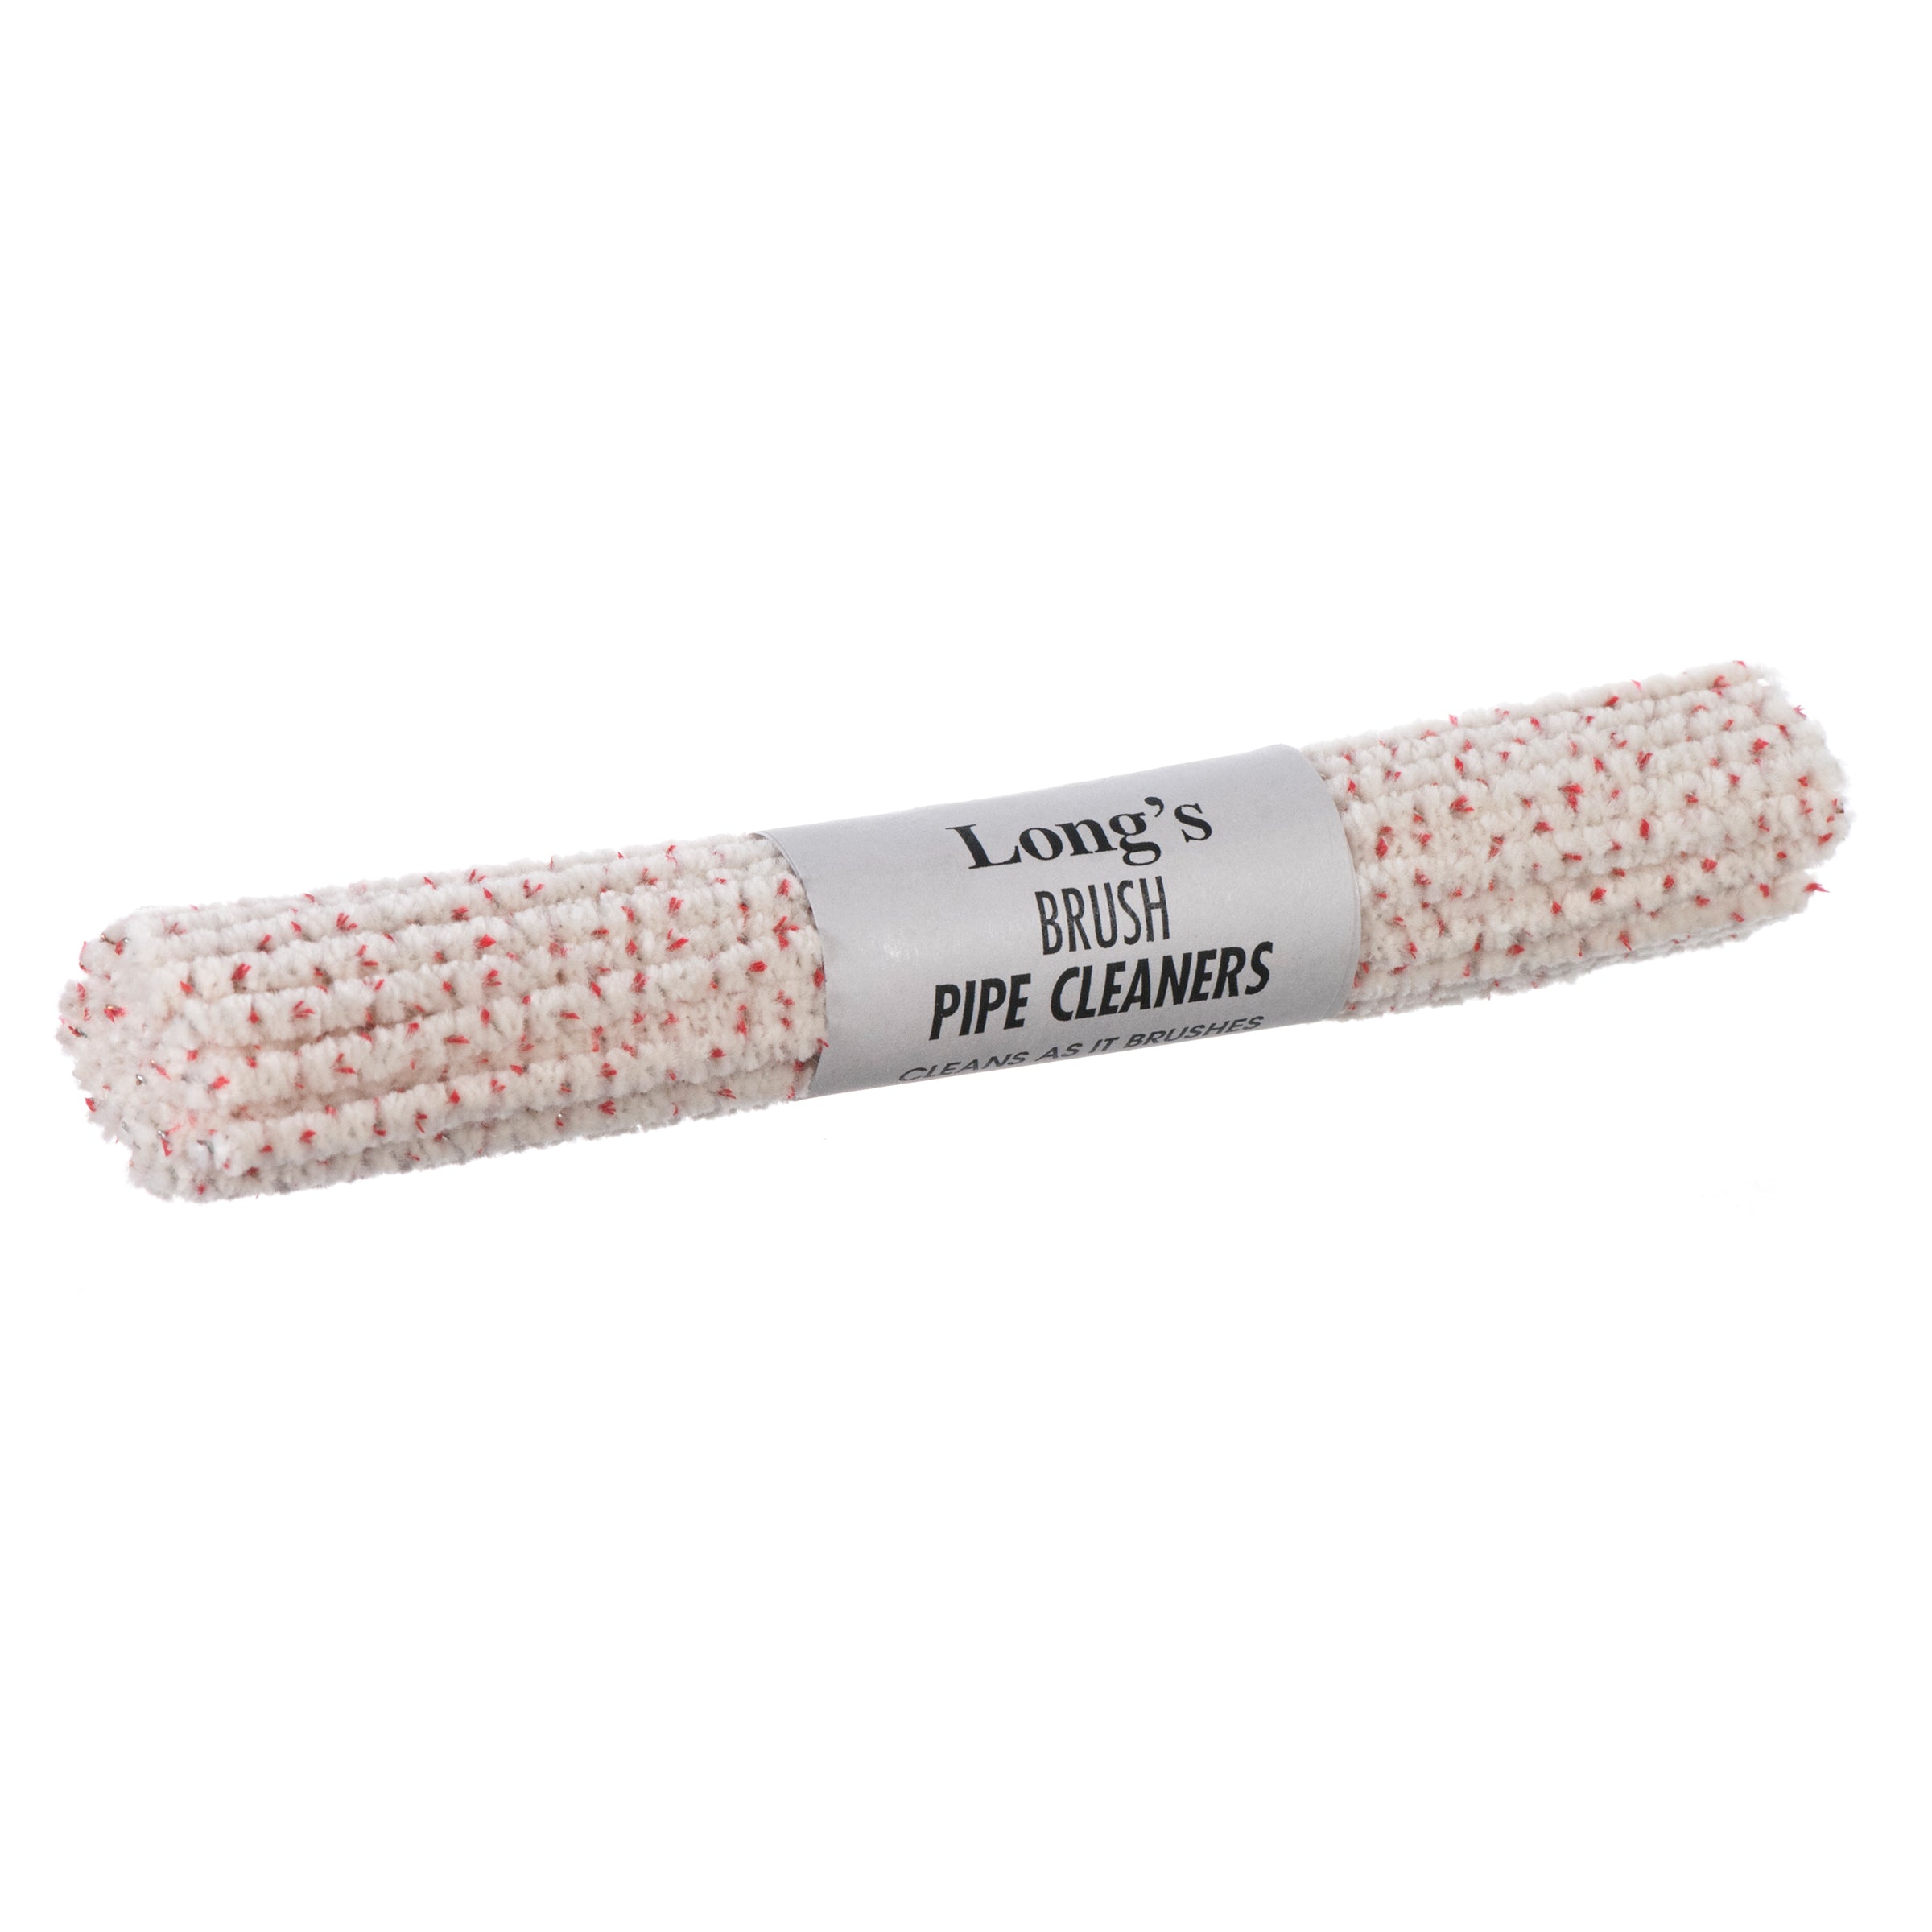 BJ Long's Thin Pipe Cleaners (3-pks of 56)